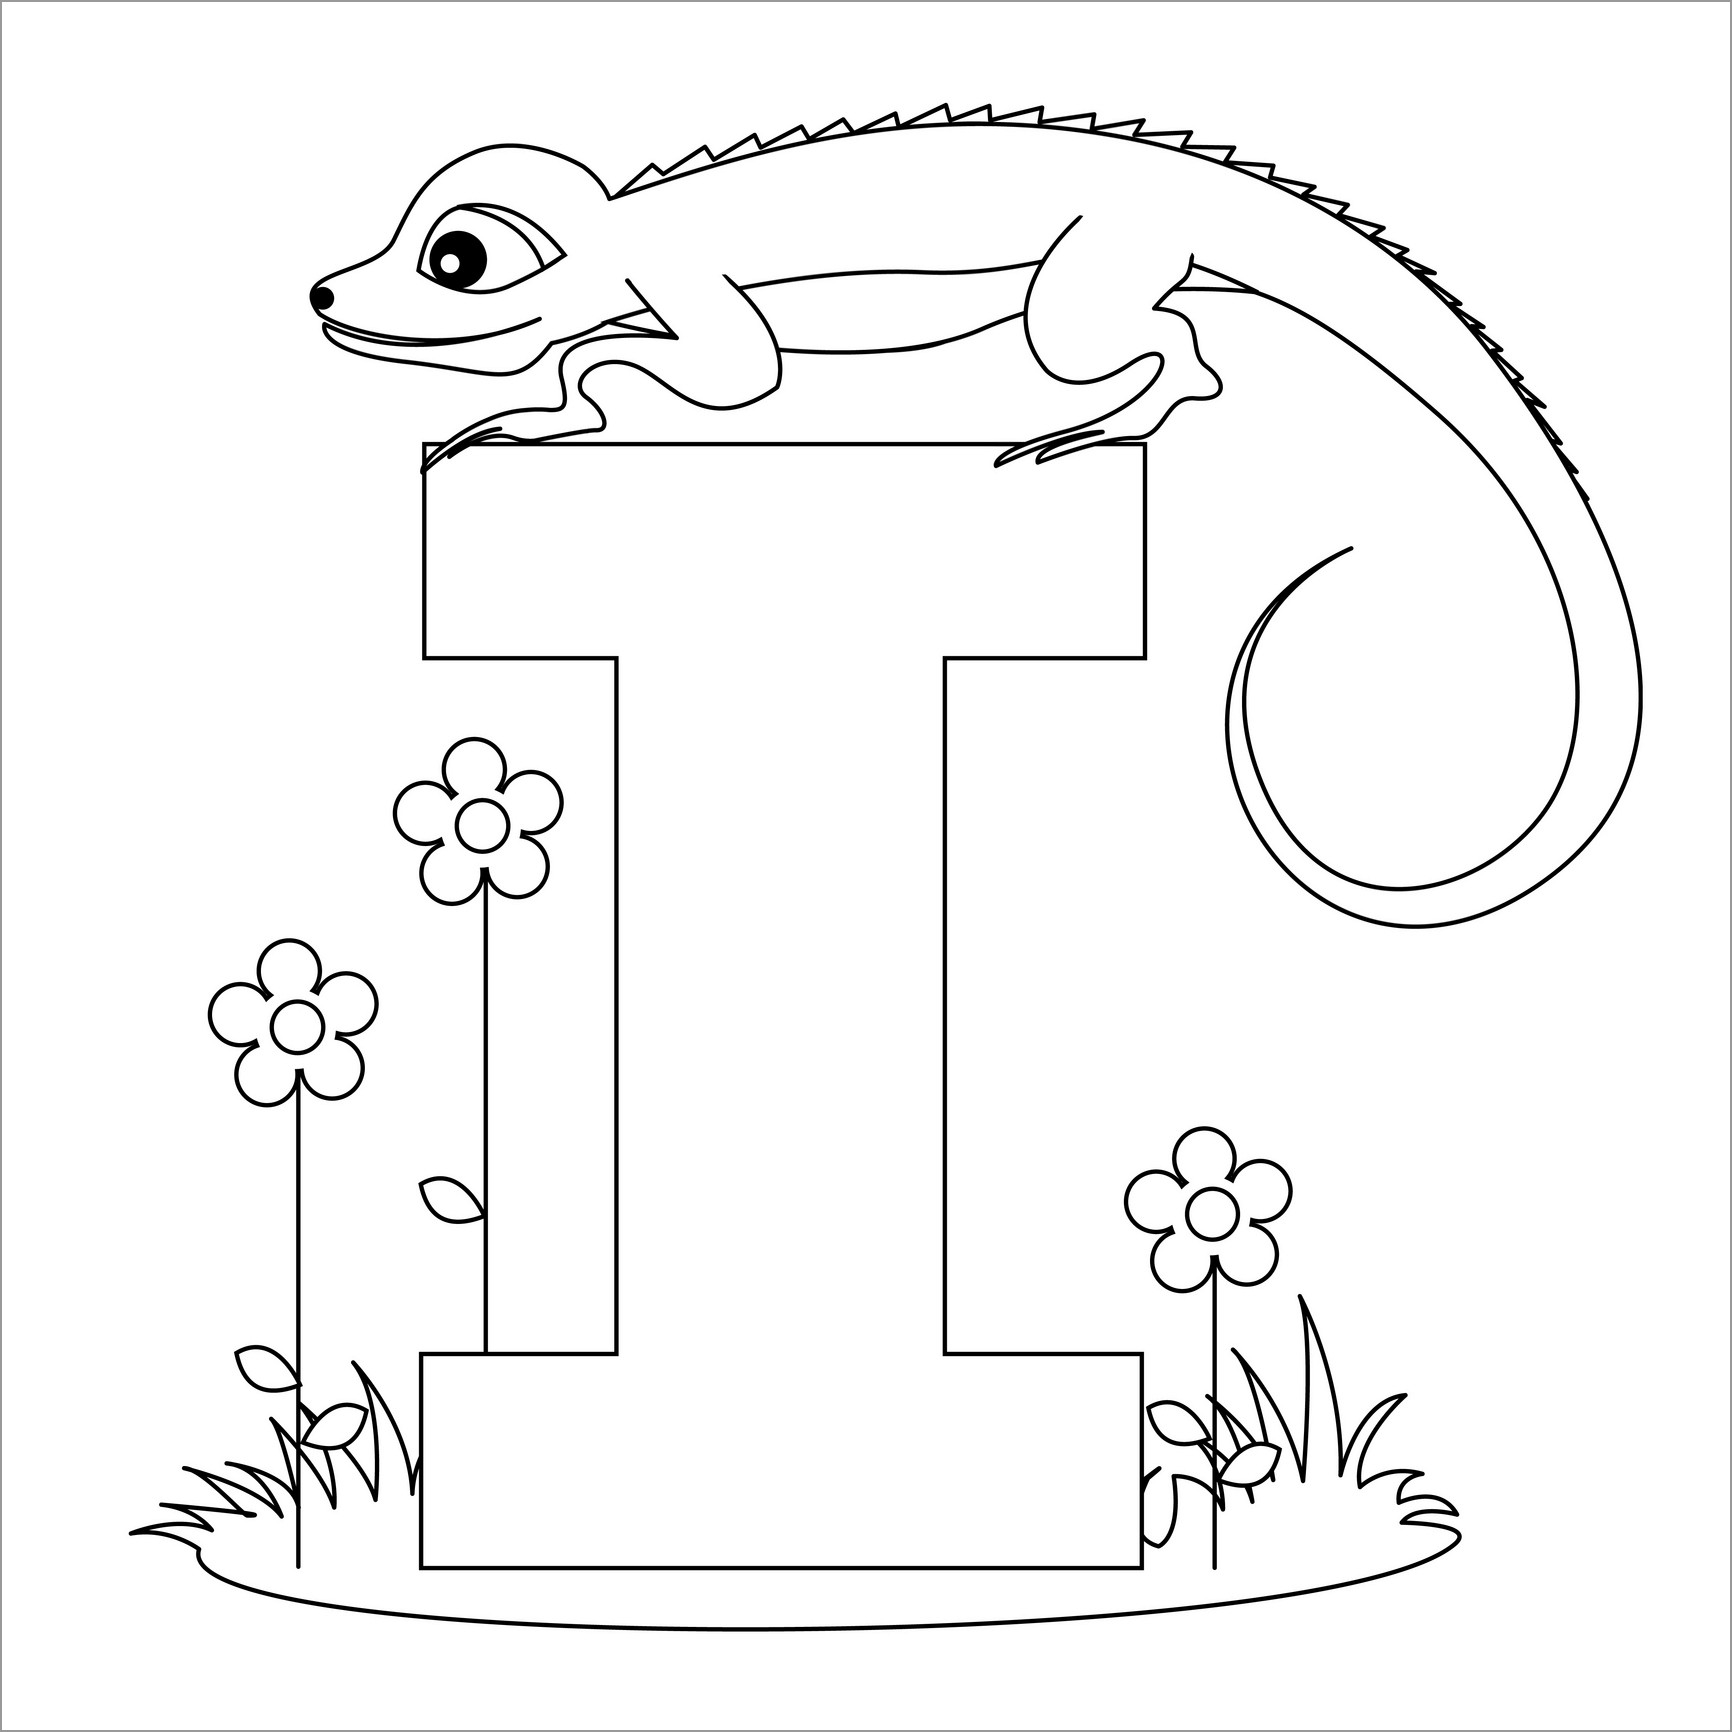 Printable Letter I for Iguana Coloring Page